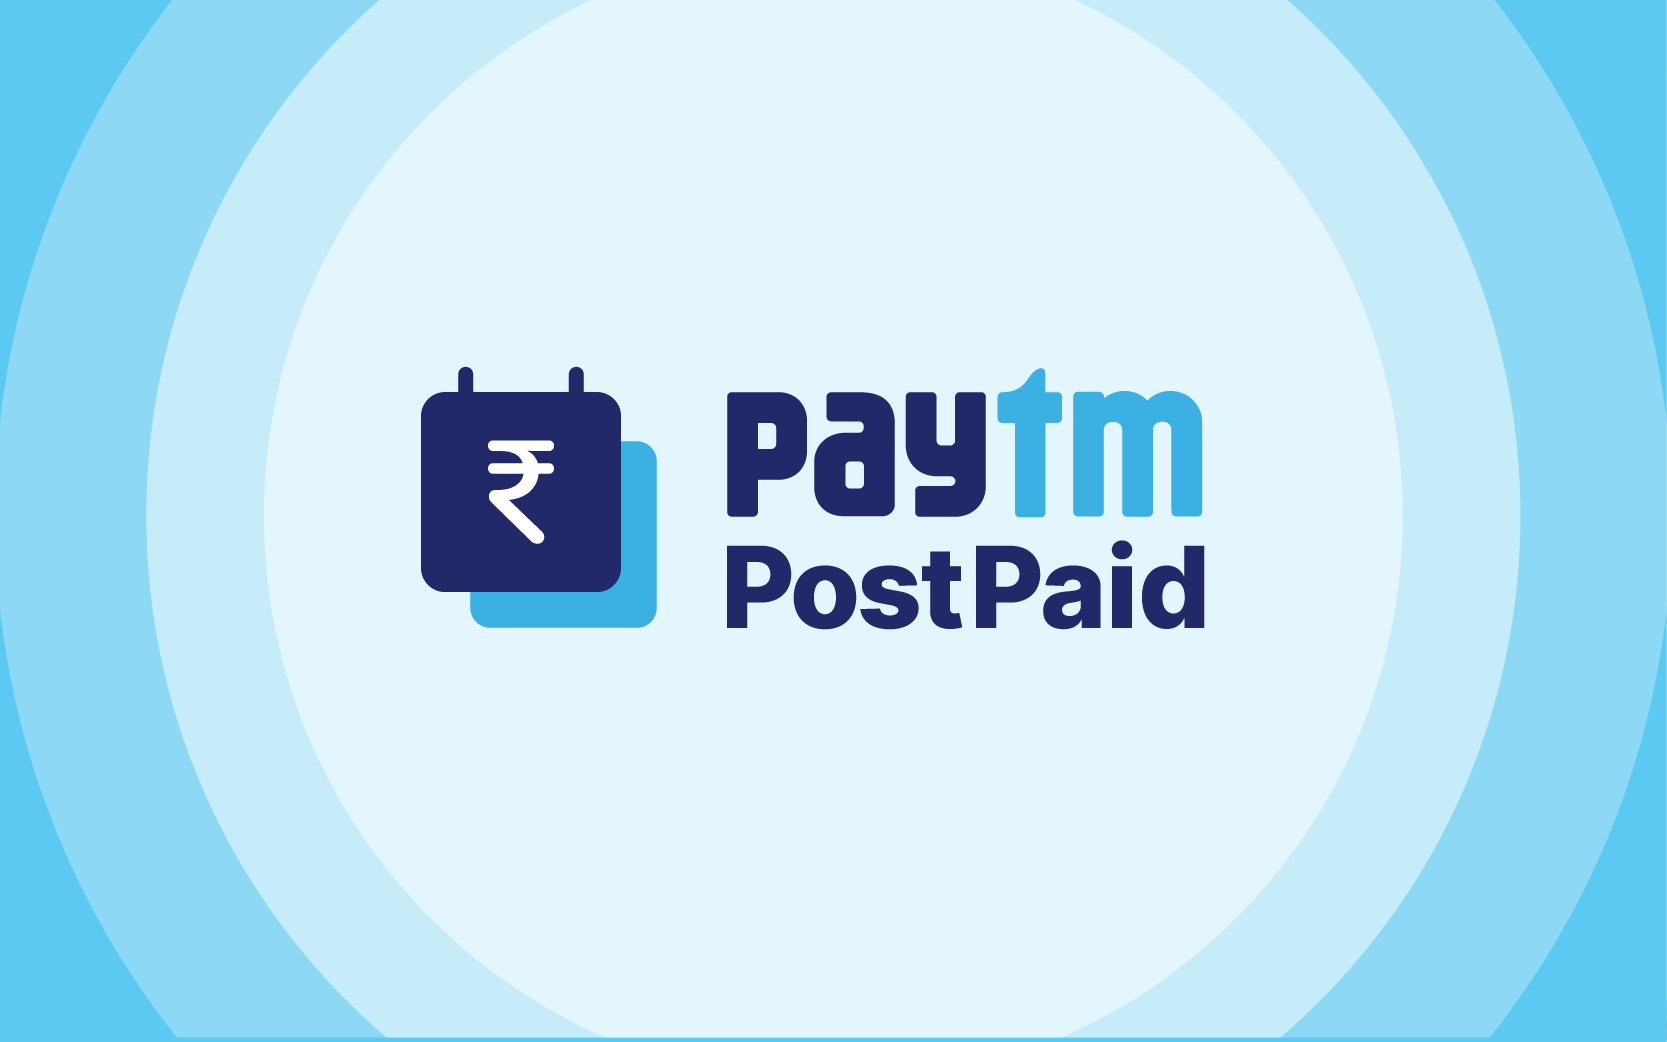 Paytm Postpaid: Apply for Paytm Postpaid, Eligibility, Bill Repayment